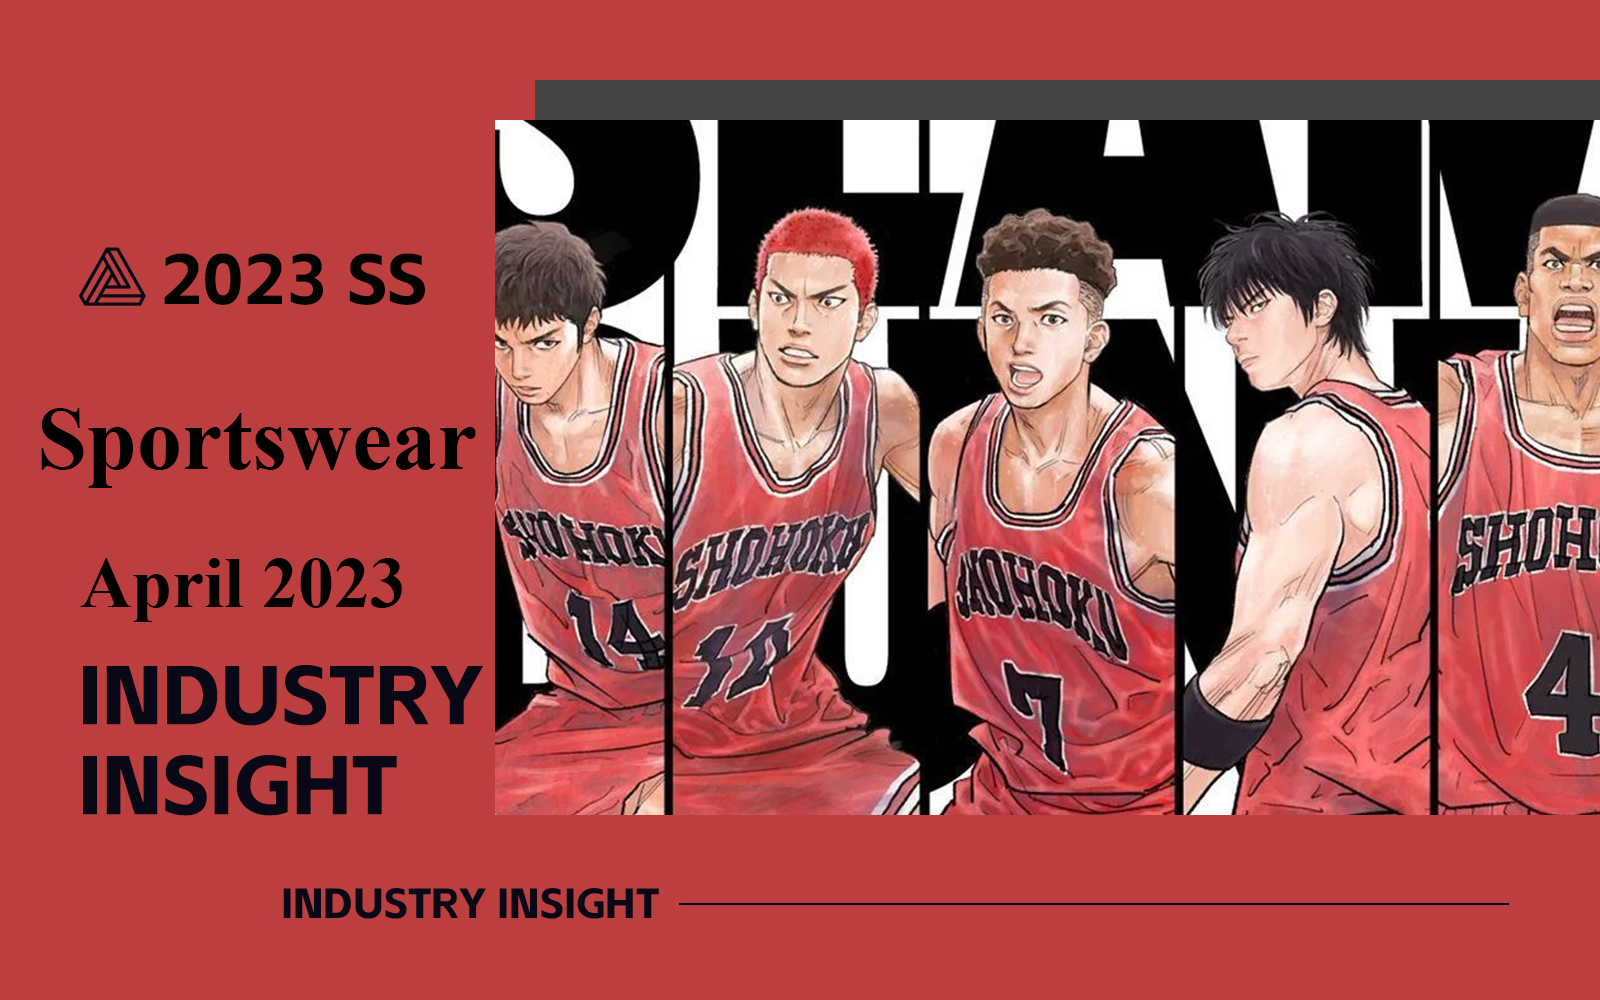 April 2023 -- The Industry Insight of Sportswear